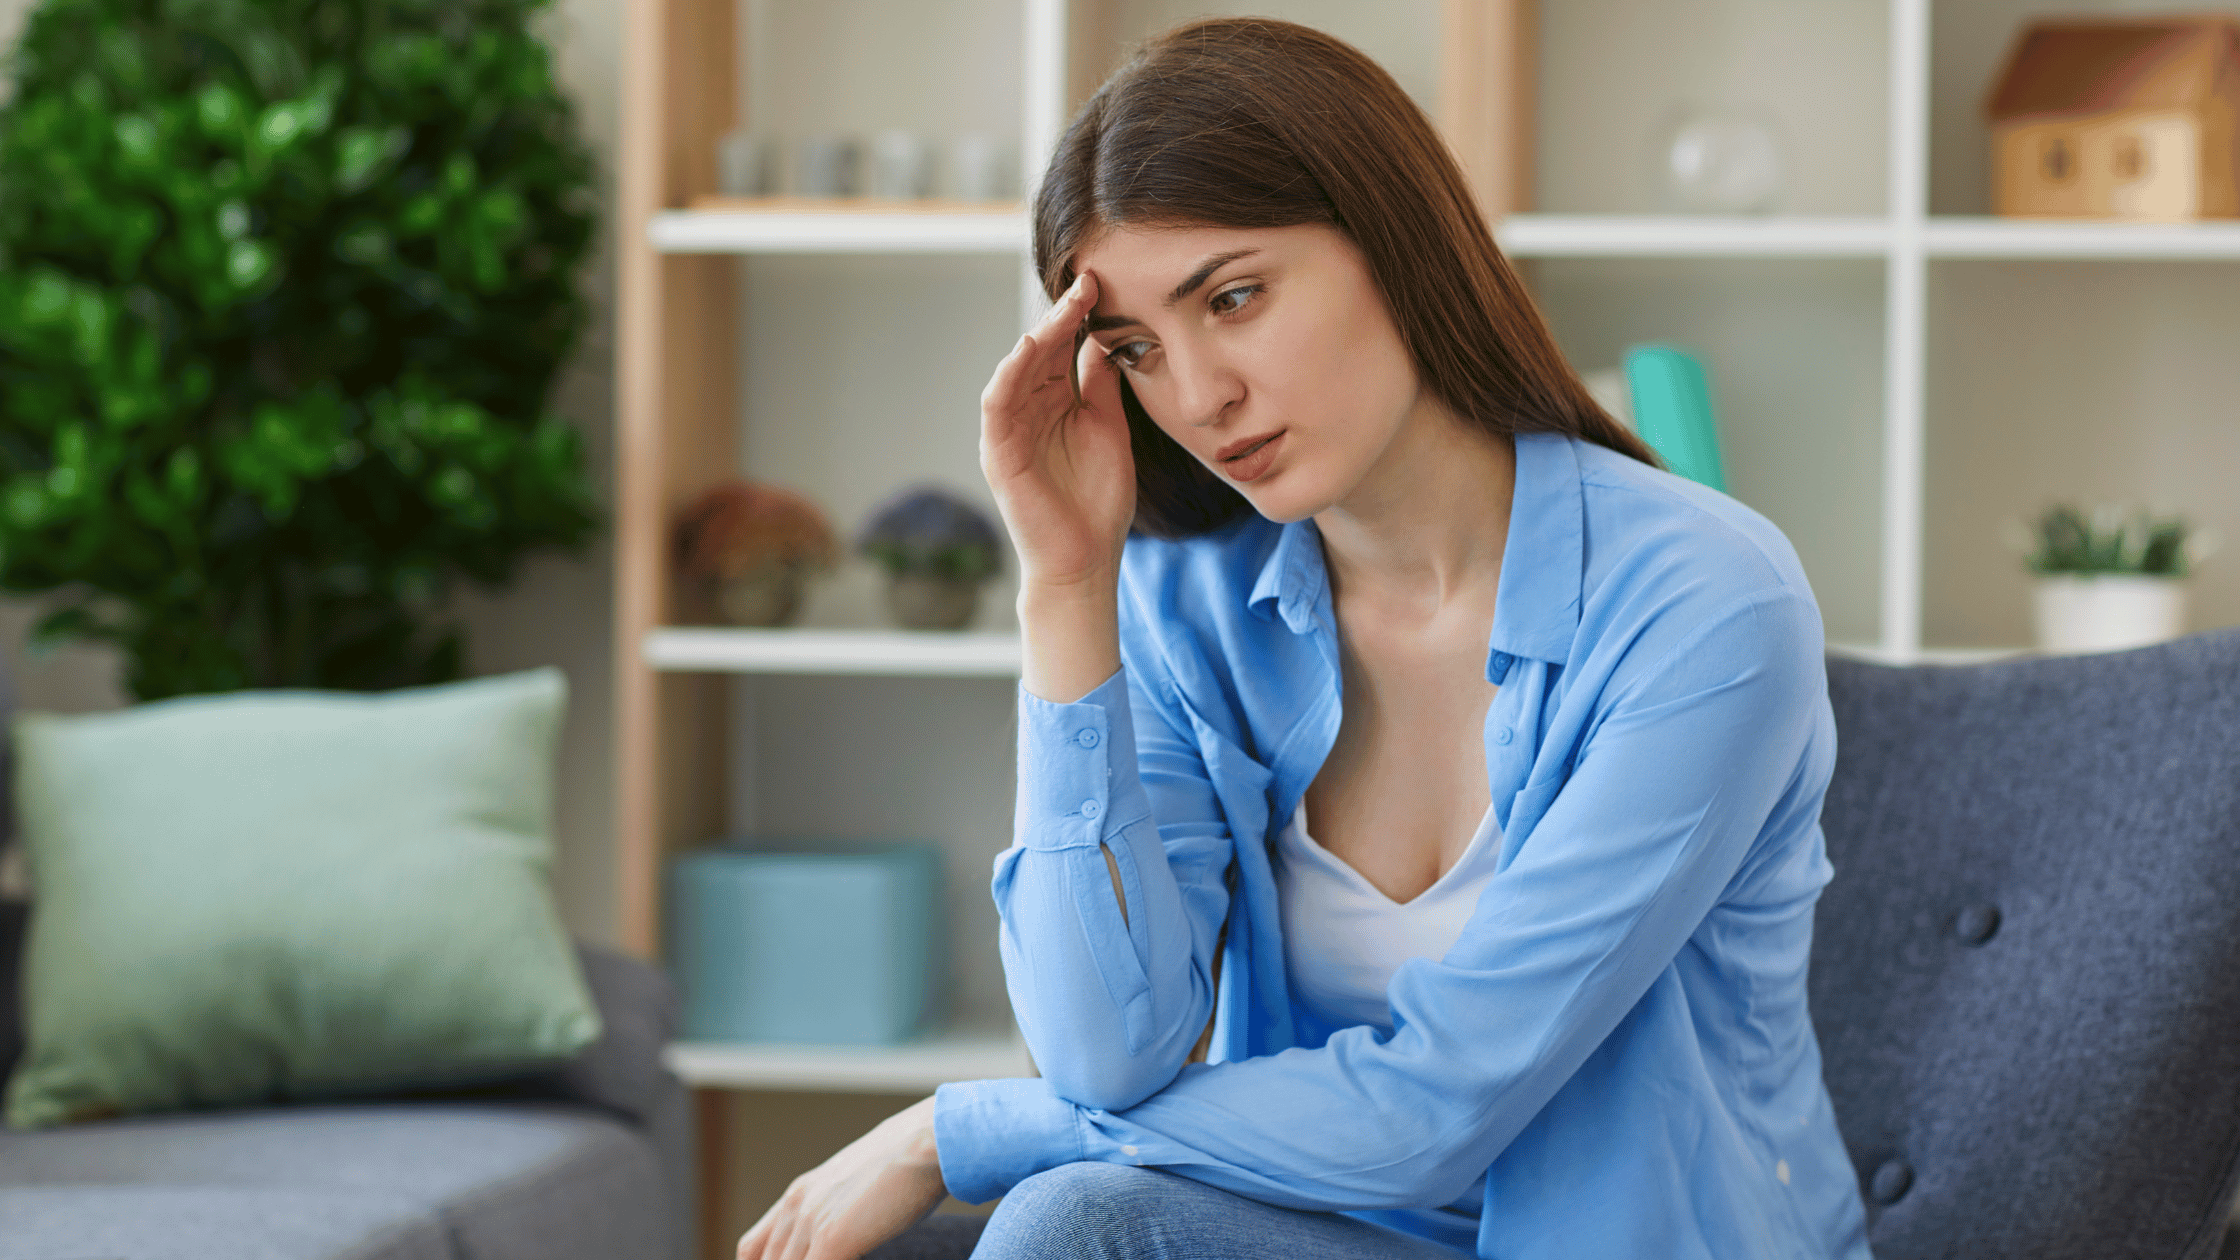 What Are the Benefits of Physical Therapy for Migraines